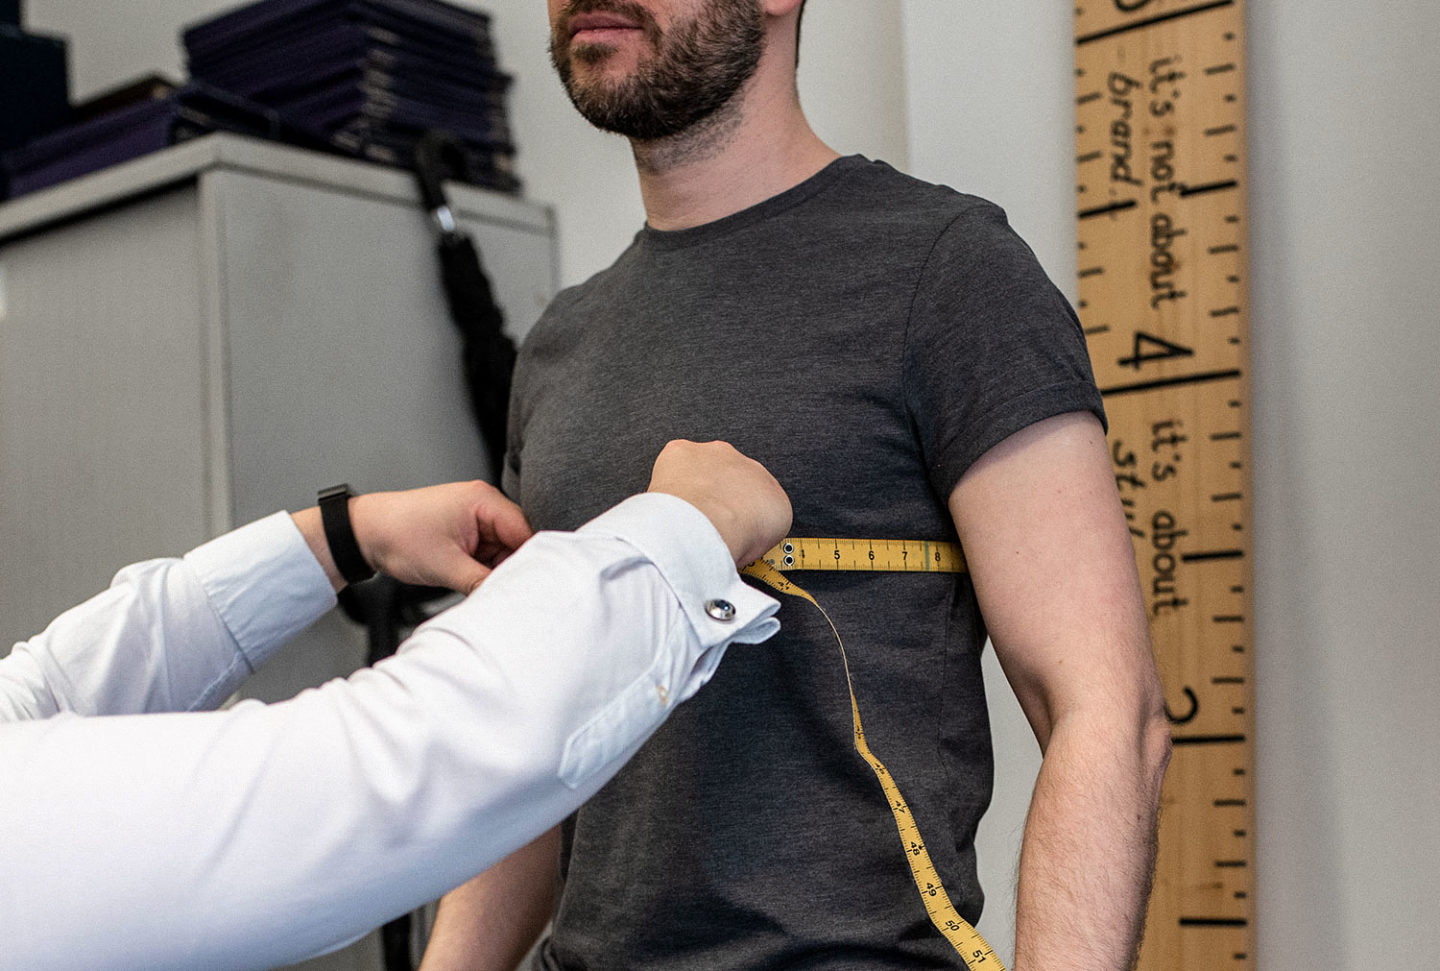 Getting Measured Up For A Bespoke Suit Guide - Your Average Guy